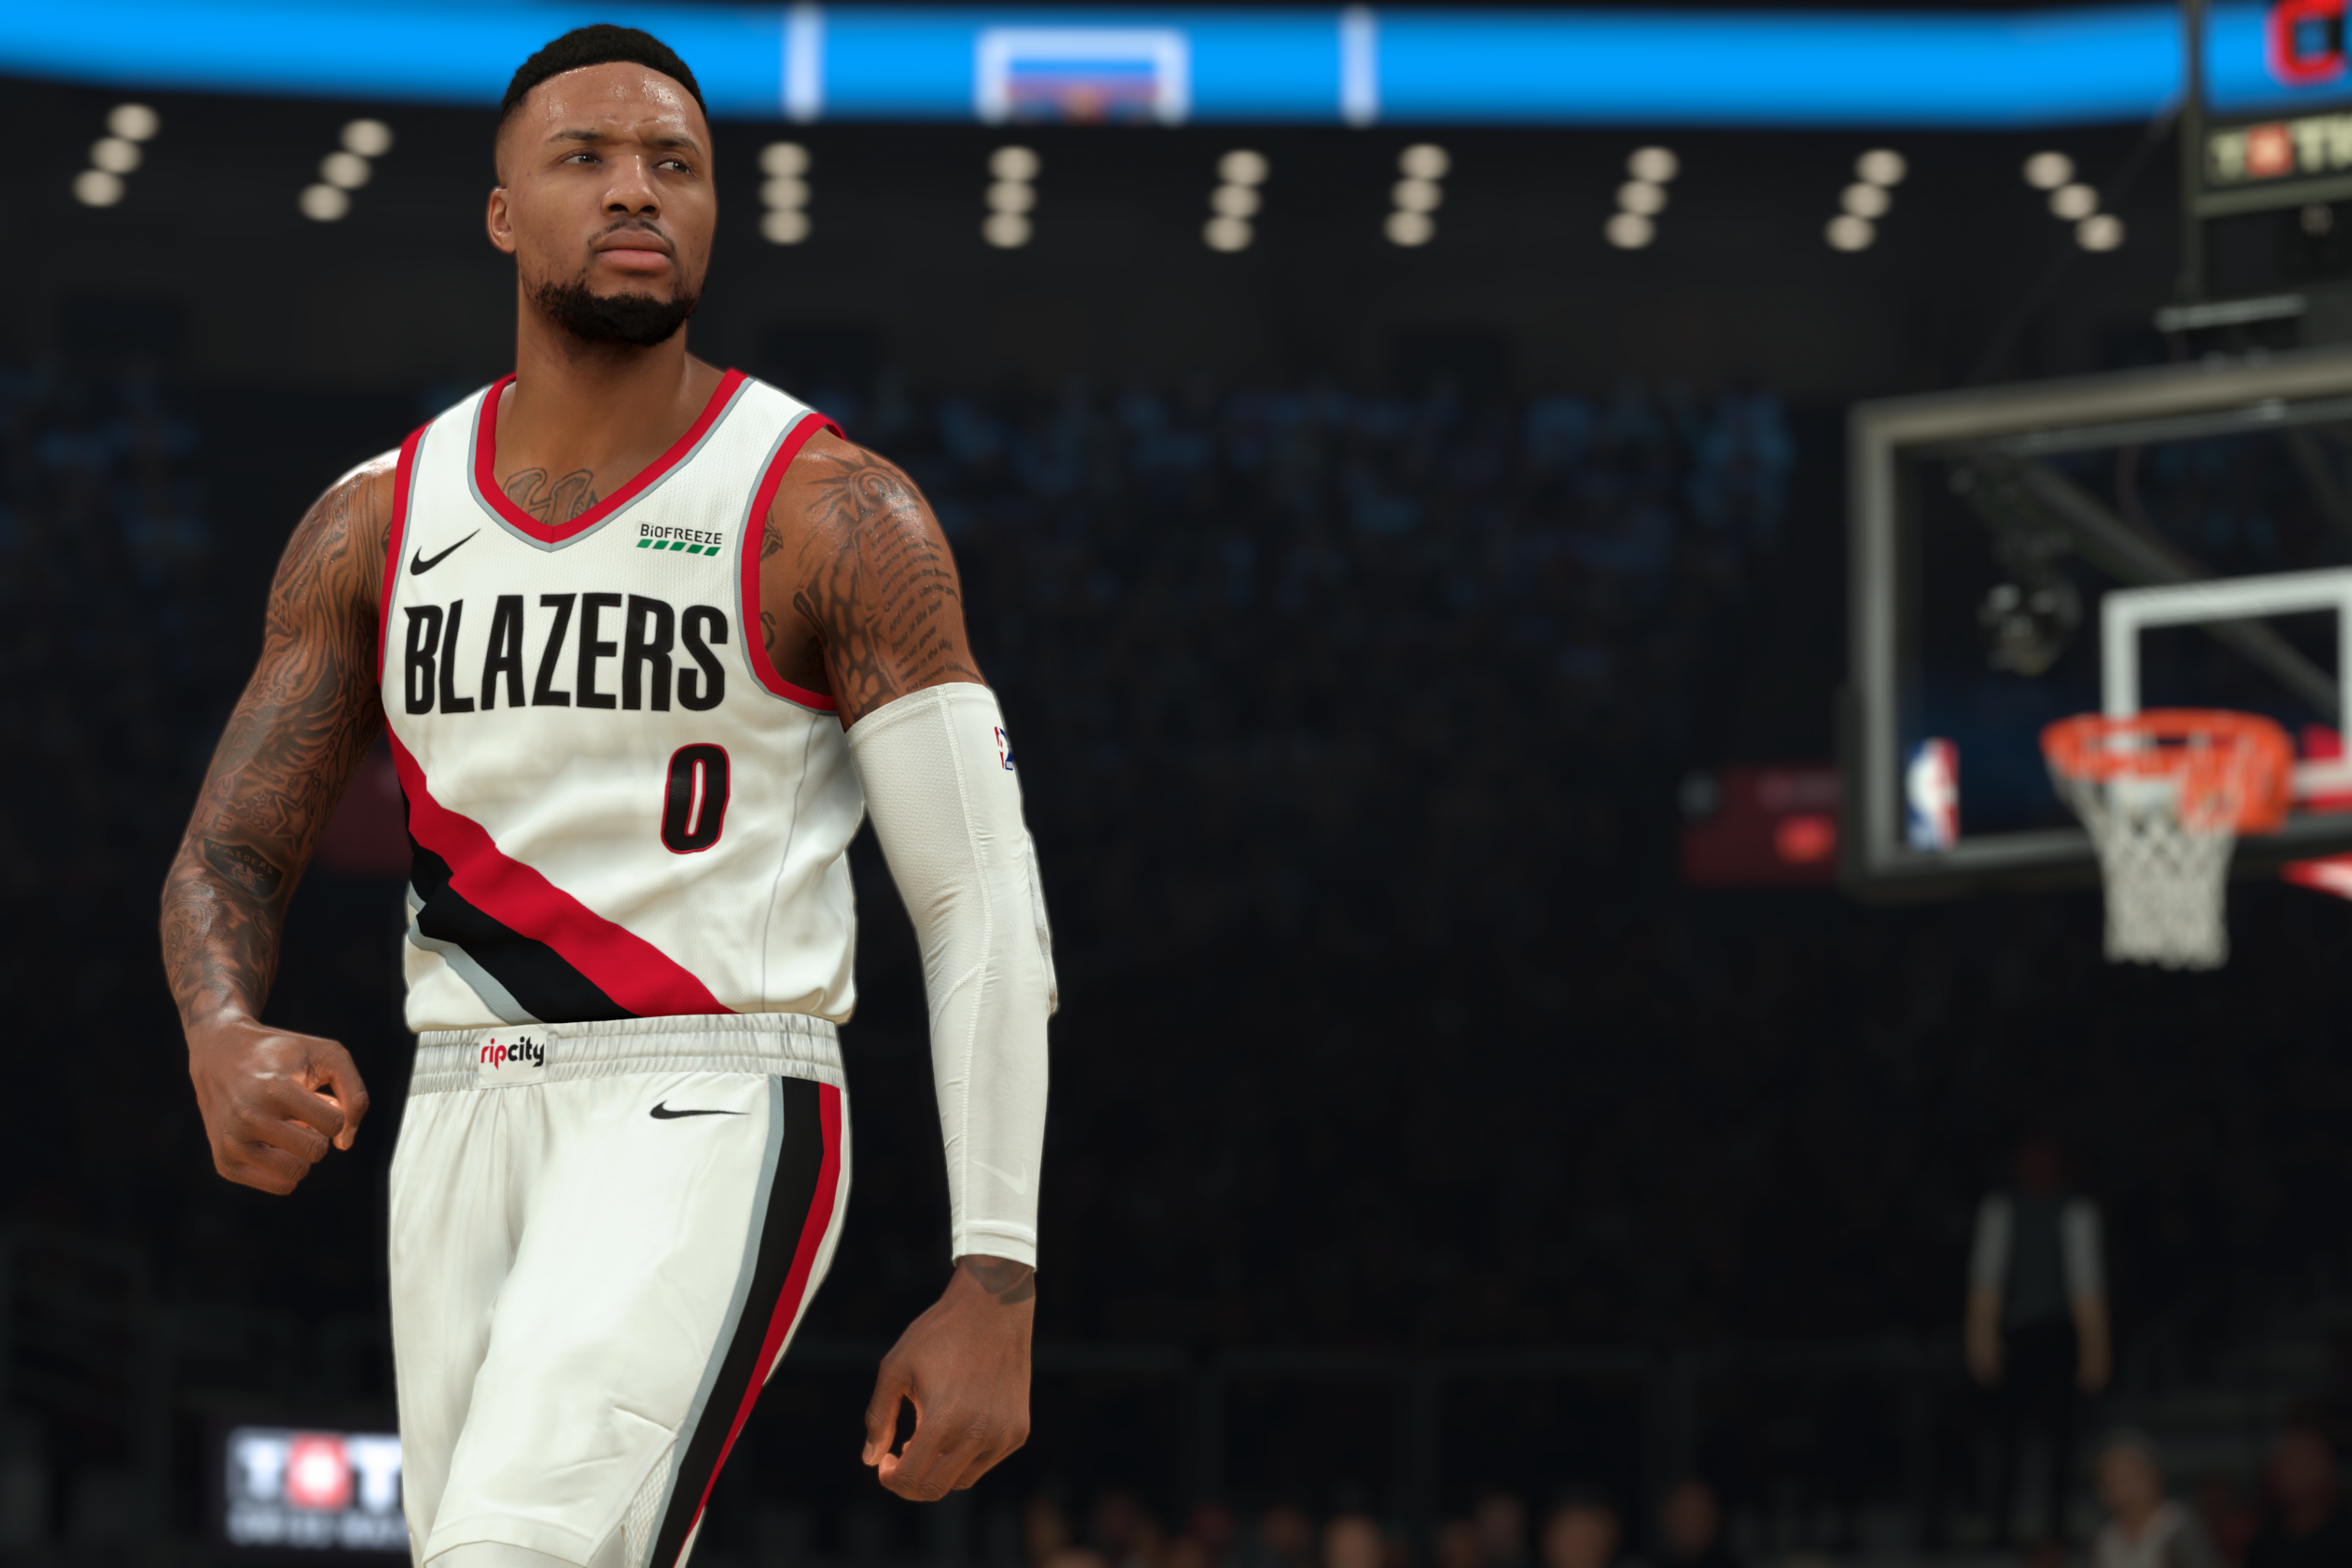 NBA 2K19' All-Star Roster Update Live - Best & Worst Player